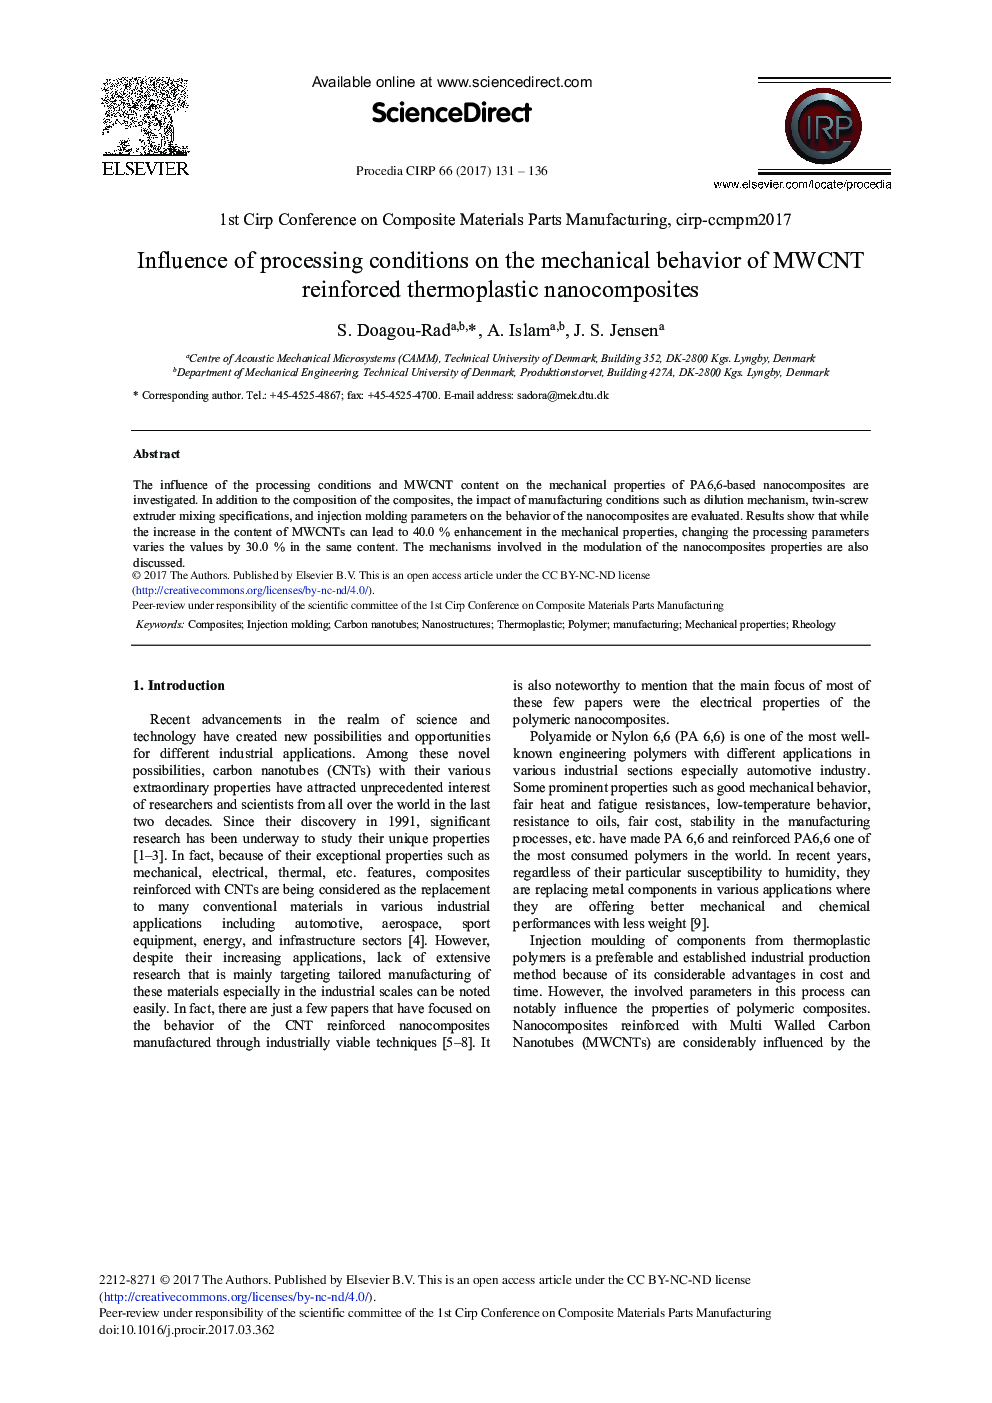 Influence of Processing Conditions on the Mechanical Behavior of MWCNT Reinforced Thermoplastic Nanocomposites